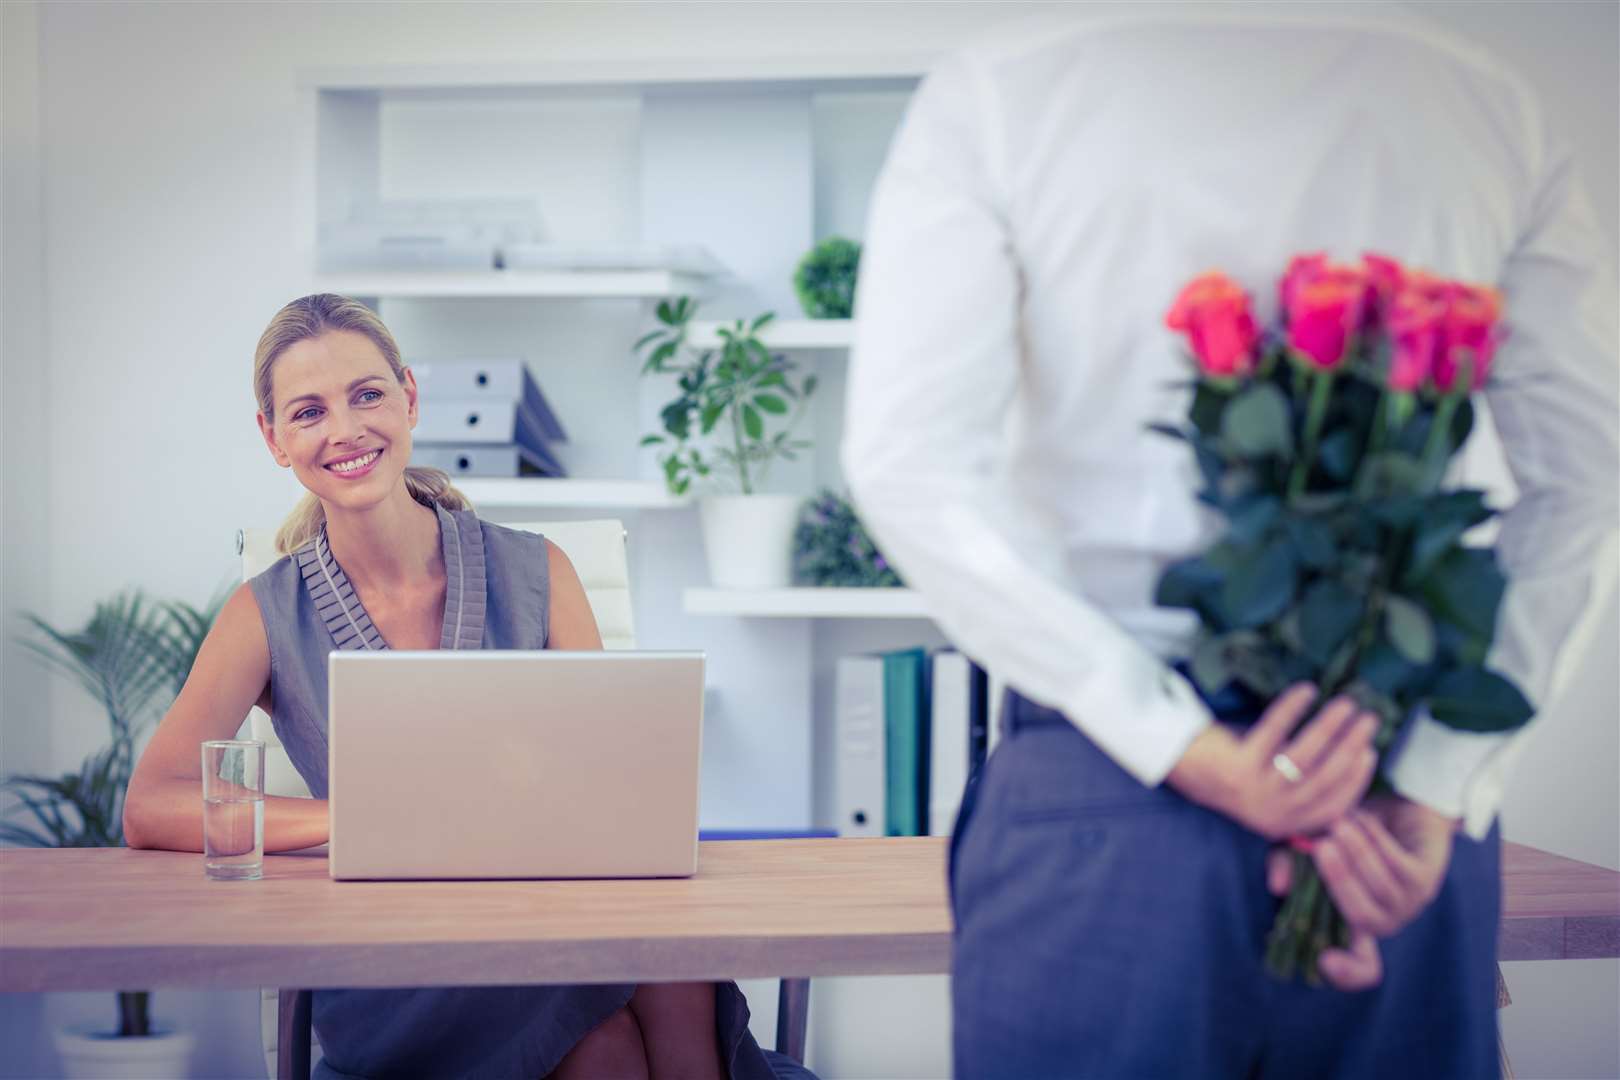 Should office romance be ruled out?